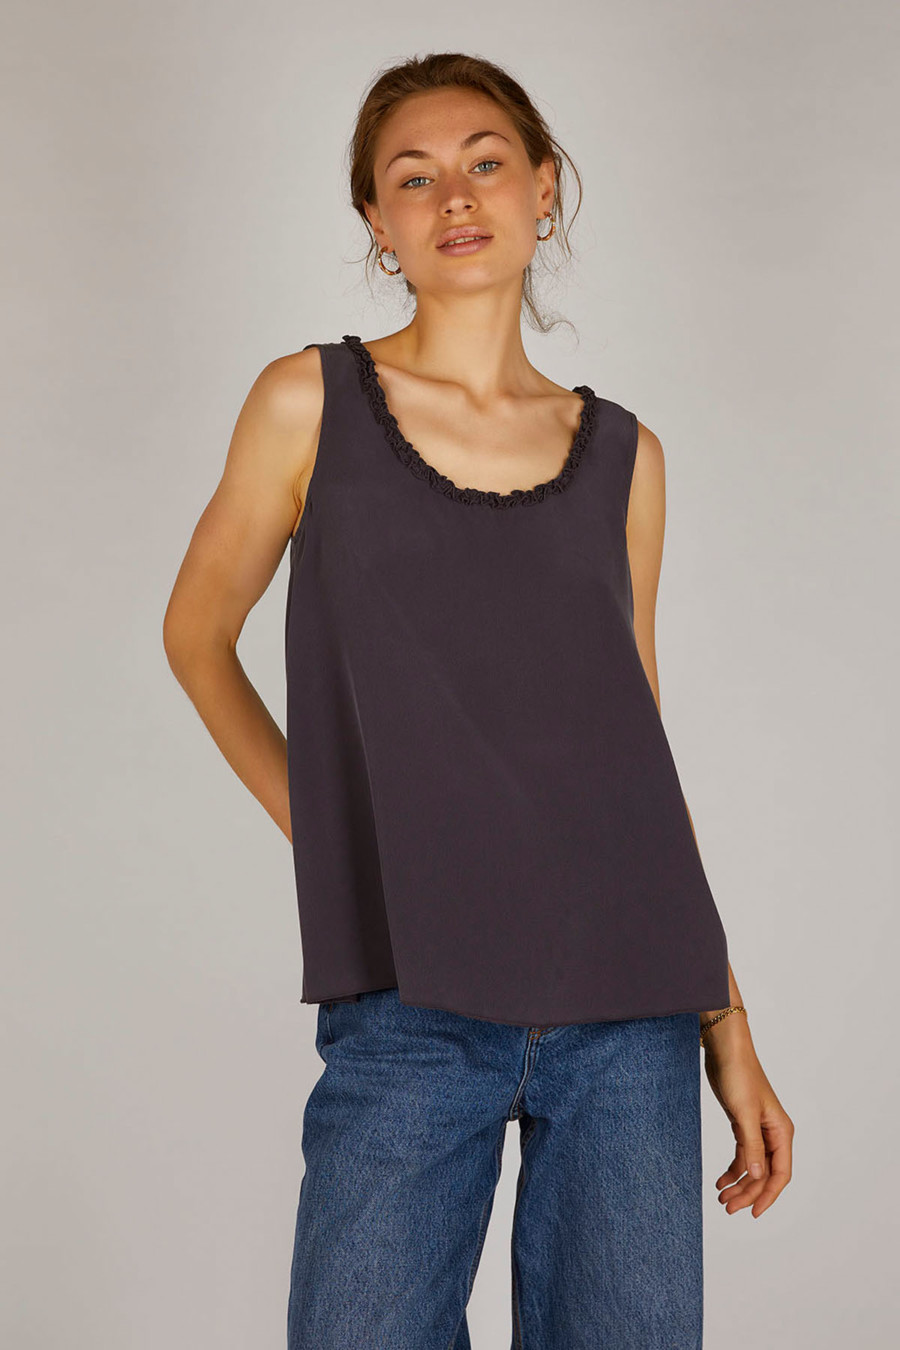 POLLY - Flowing top with ruffle details - Colour: Granite